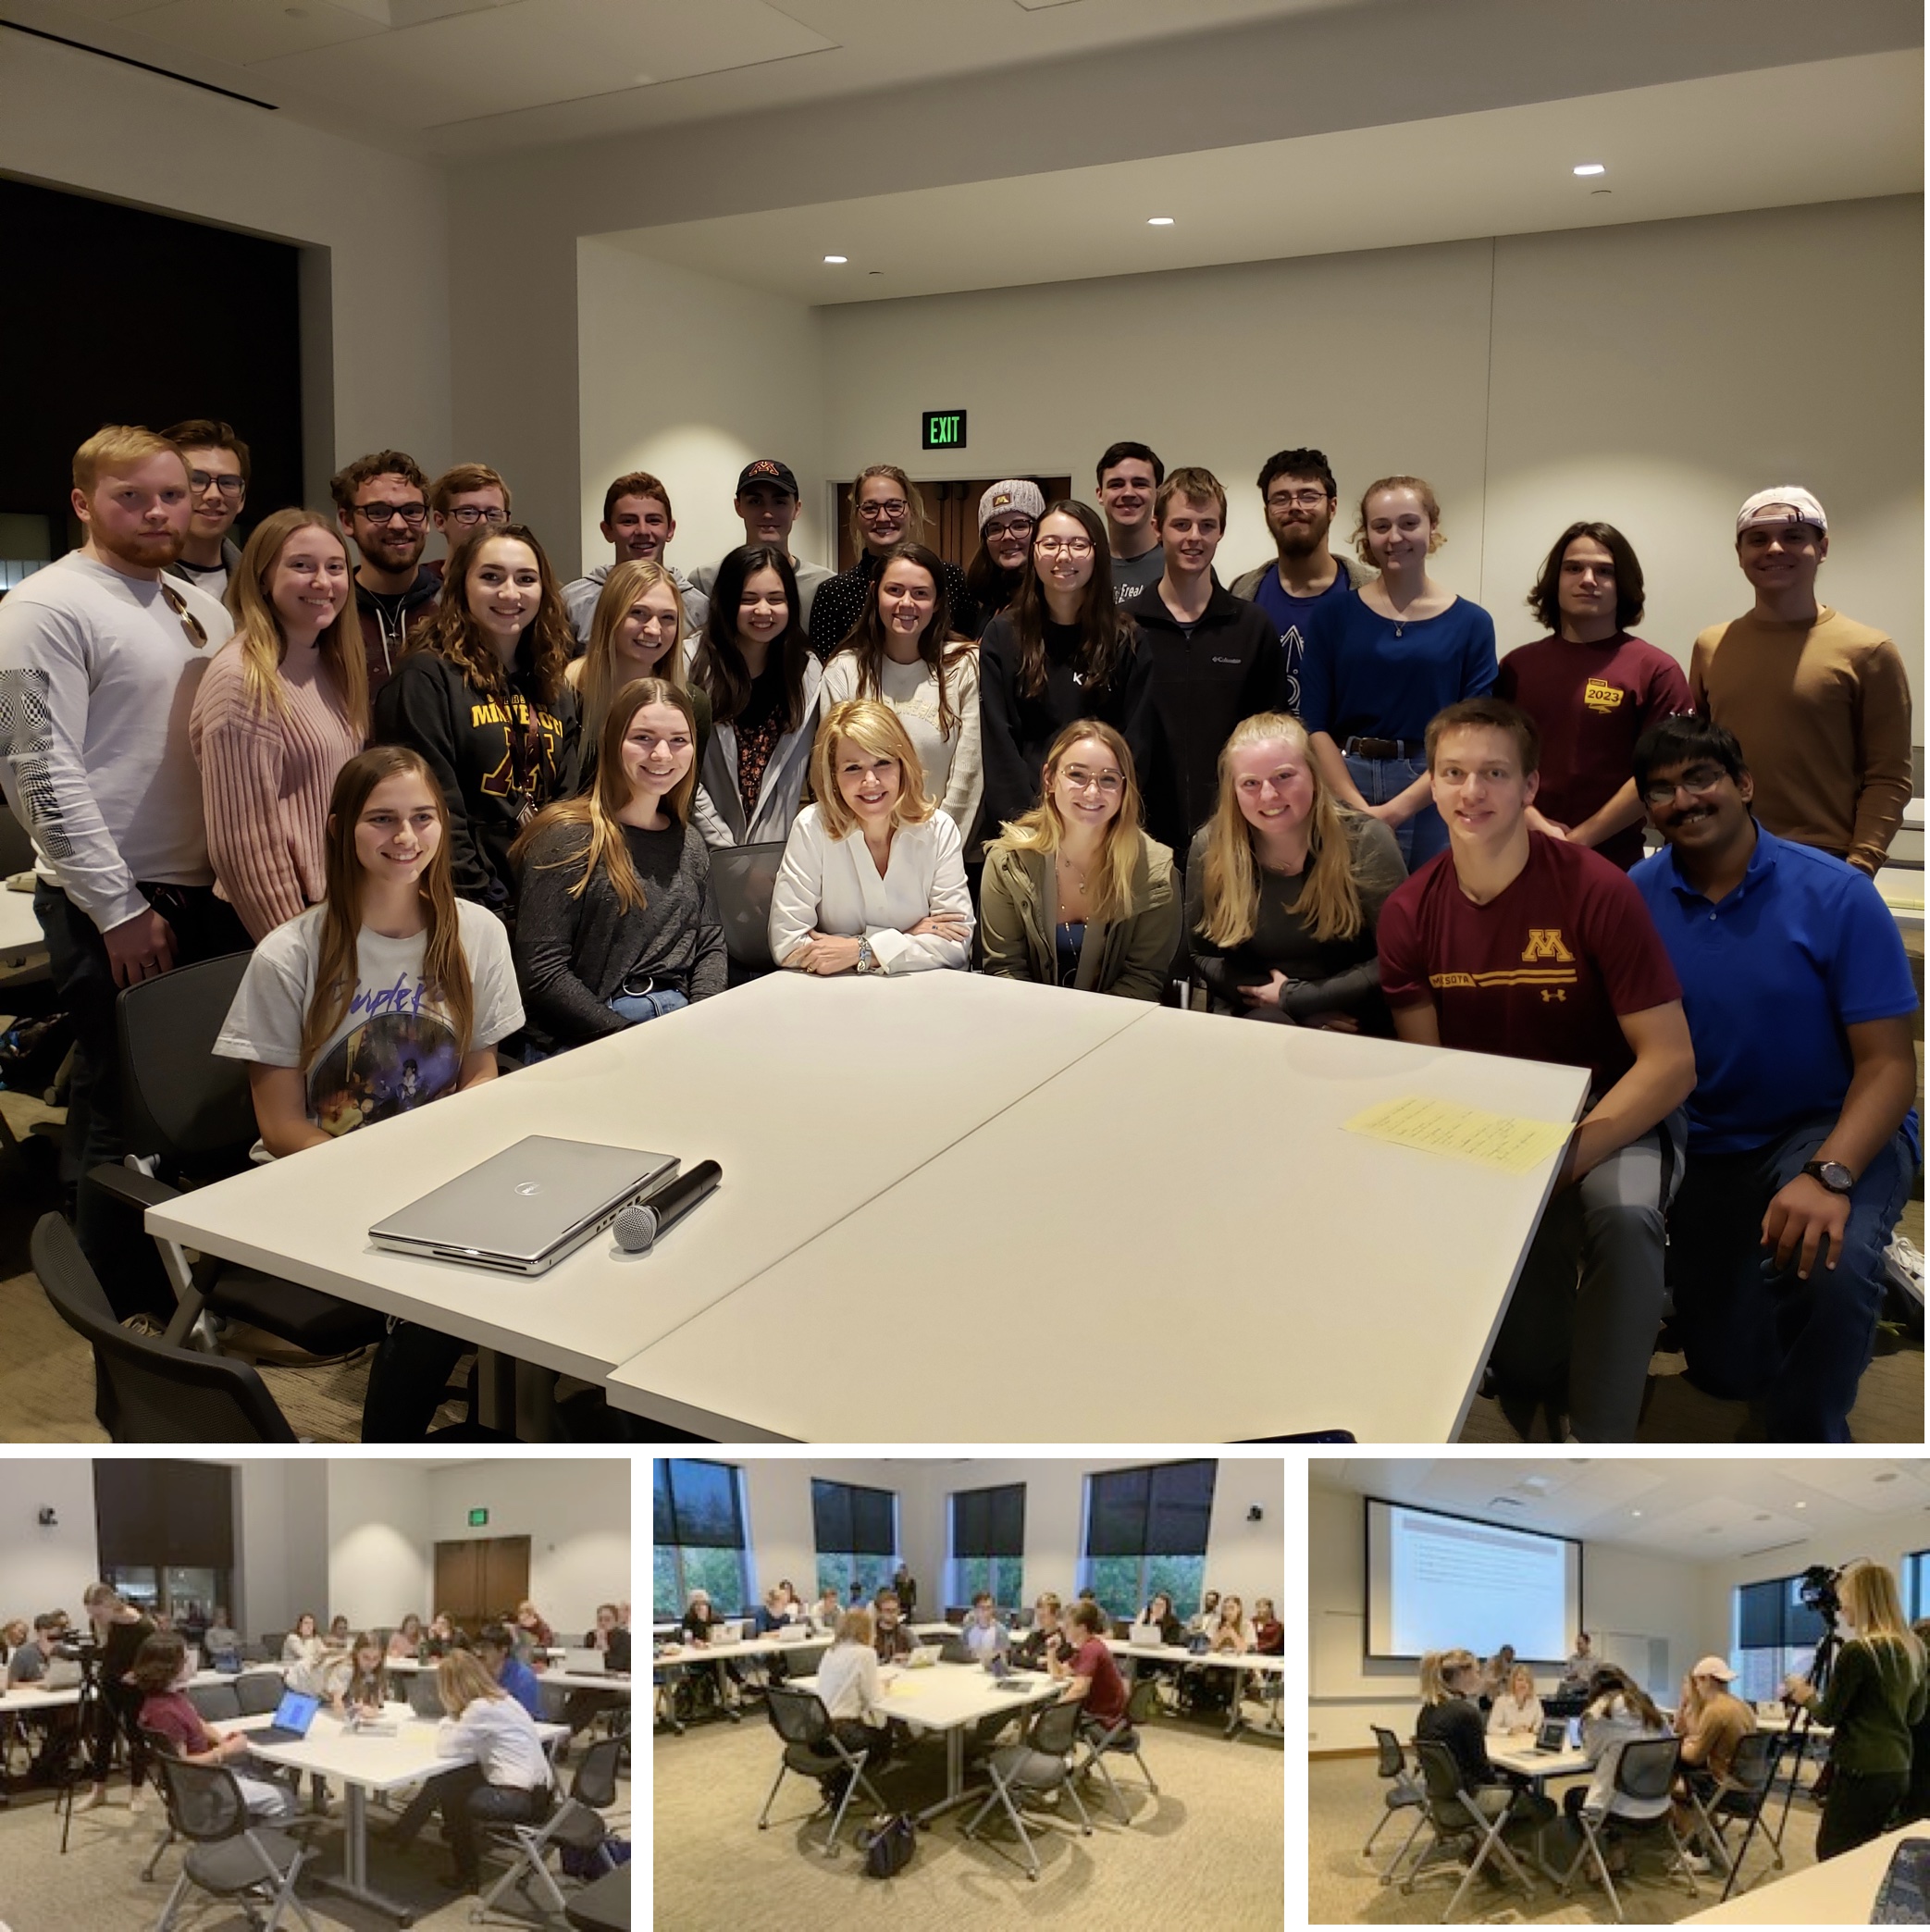 Pictures of Kerri Miller and the student of Science Court during her visit in Fall 2019